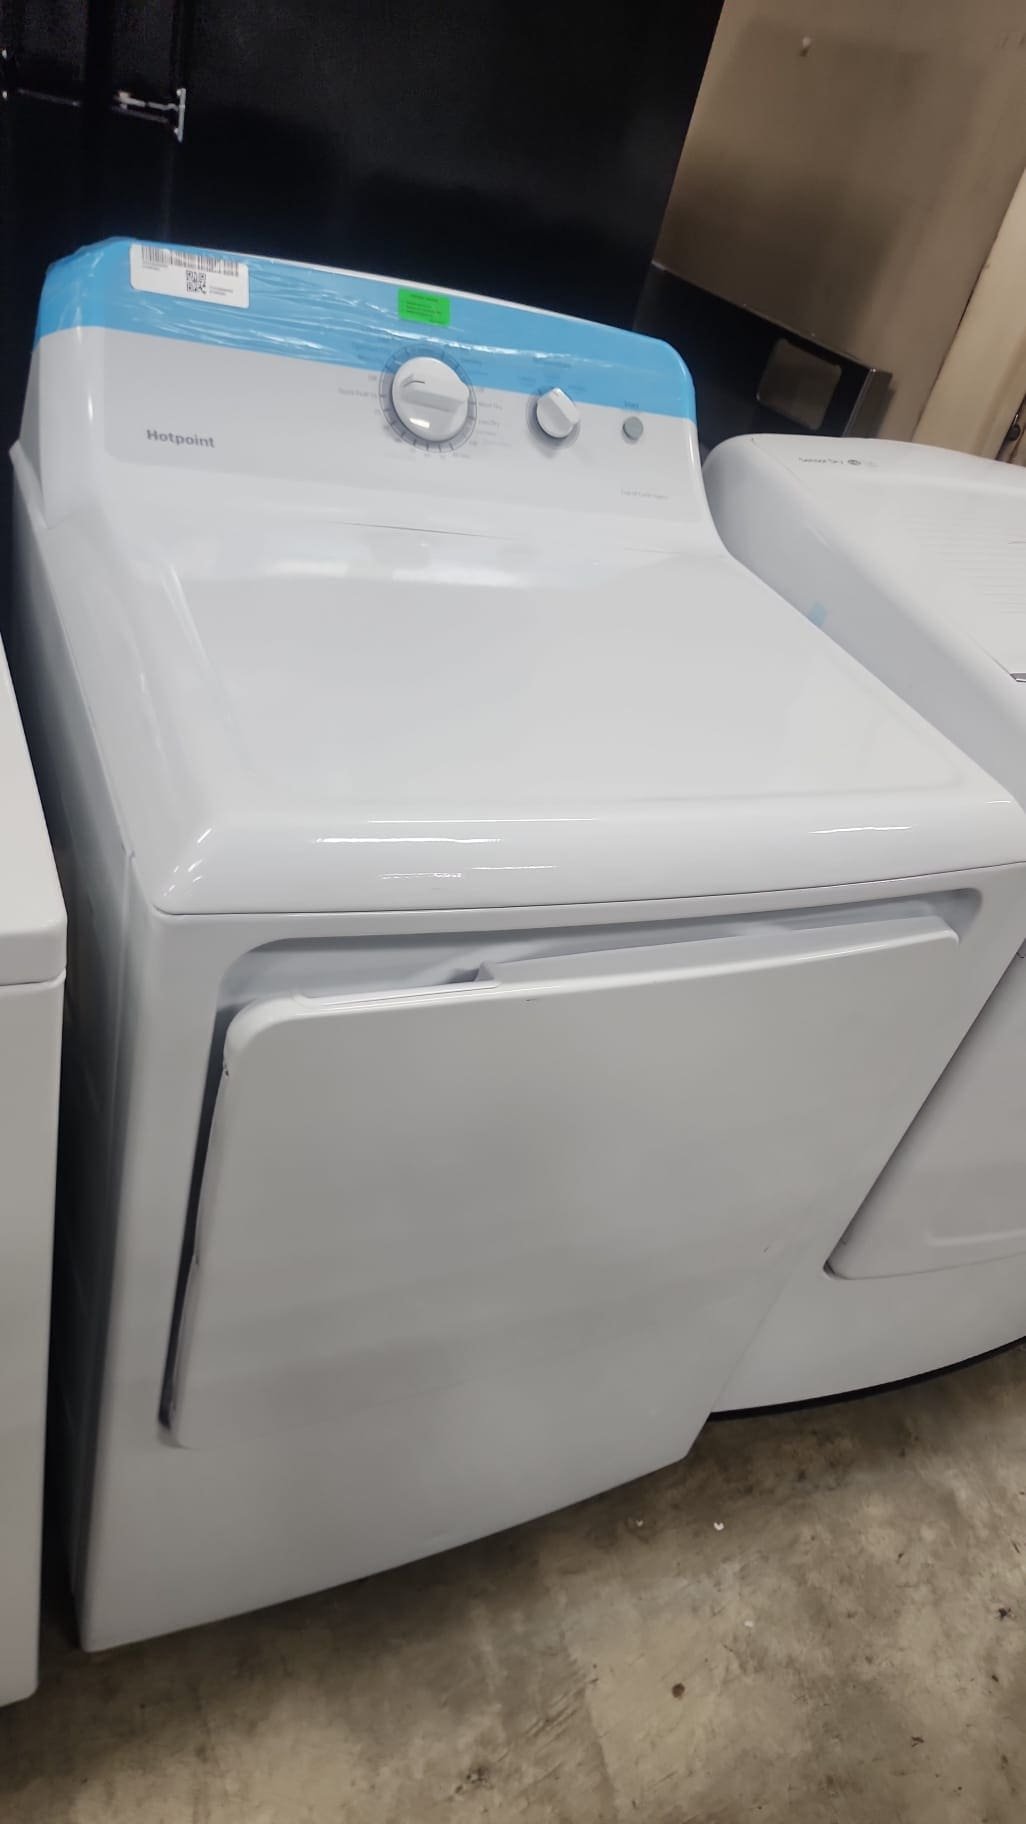 Hotpoint Like New Front Load Dryer – White